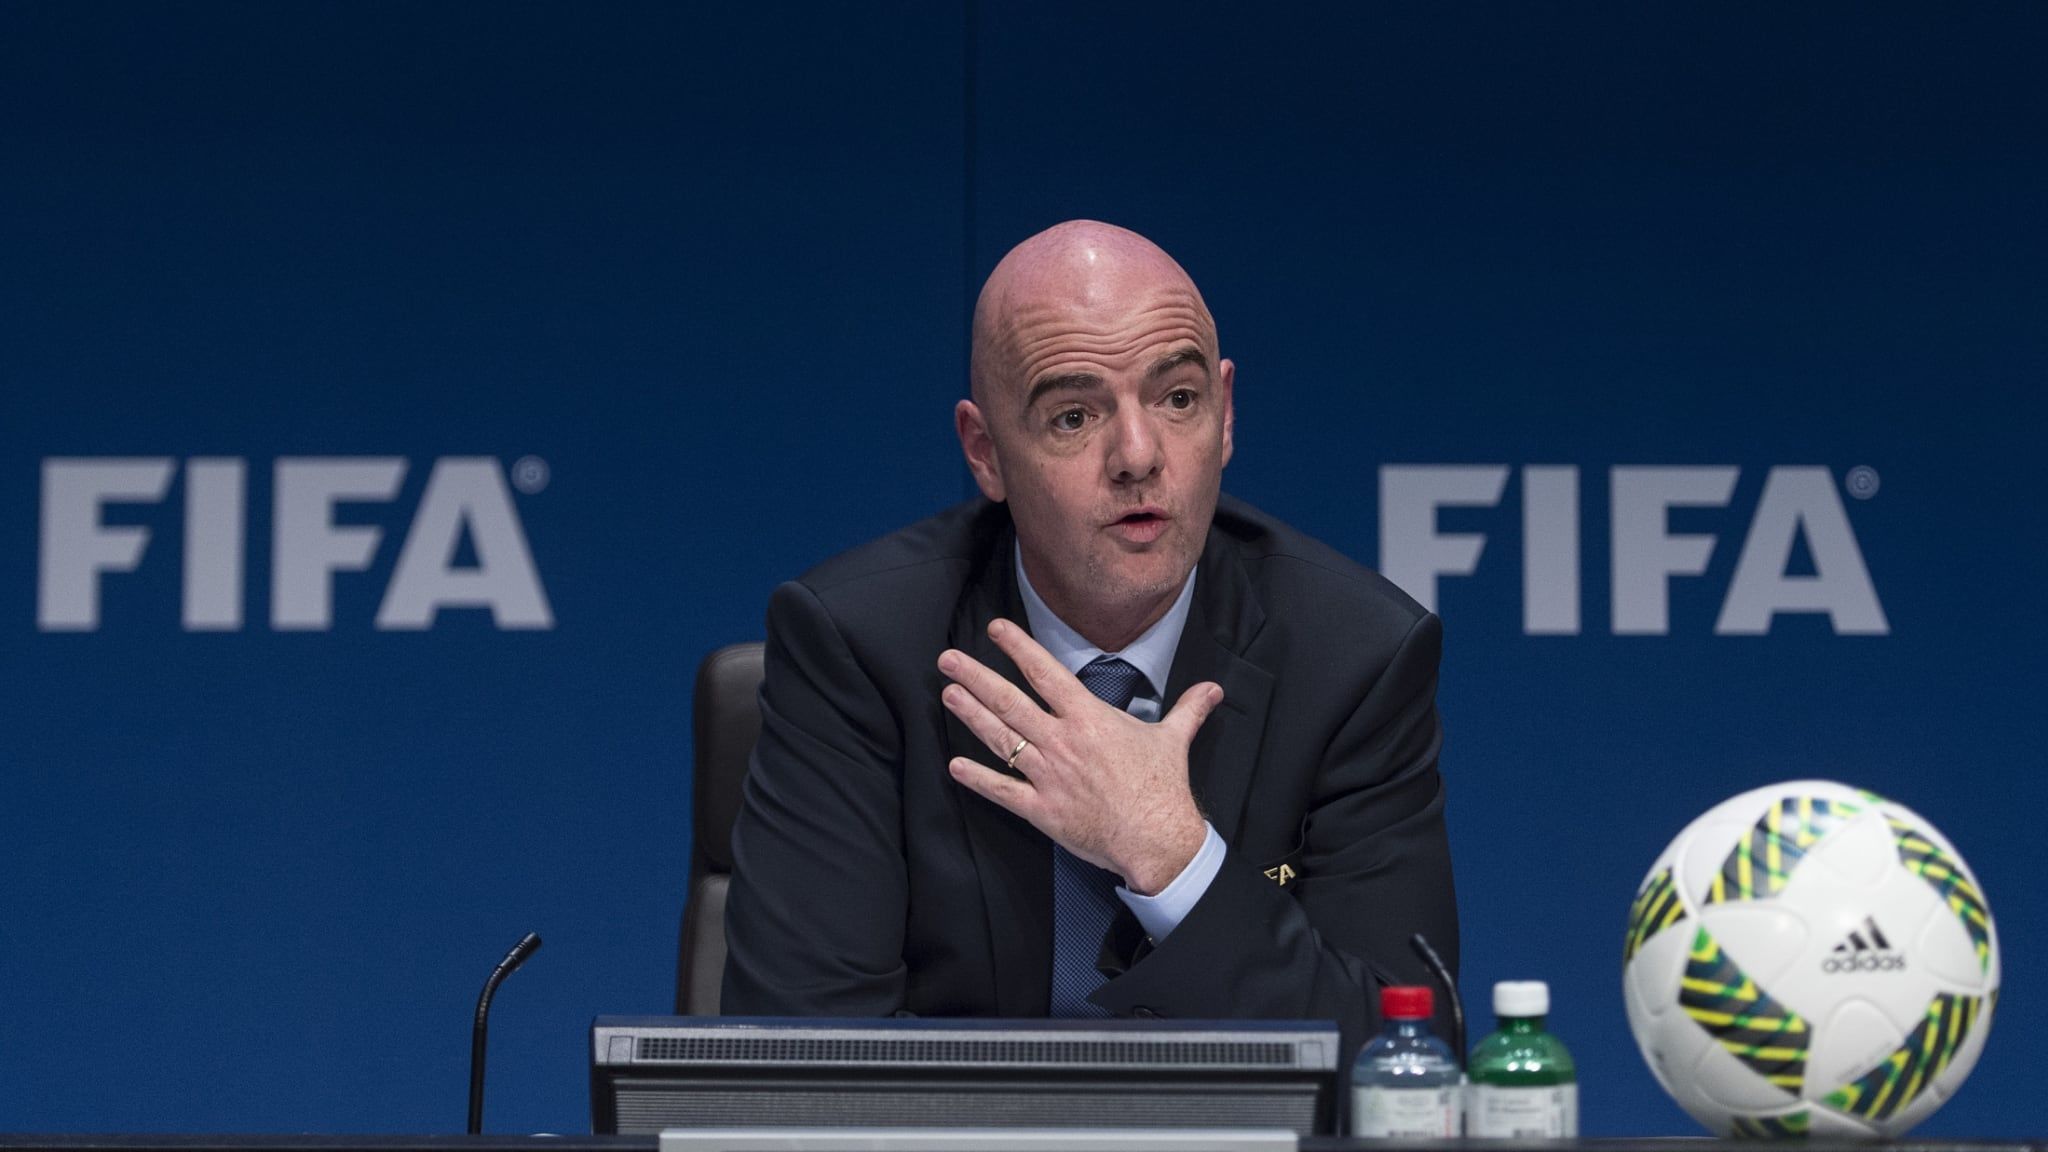 FIFA president Infantino offers his condolences to the families and friends of the 174 fans killed at the stadium in Indonesia